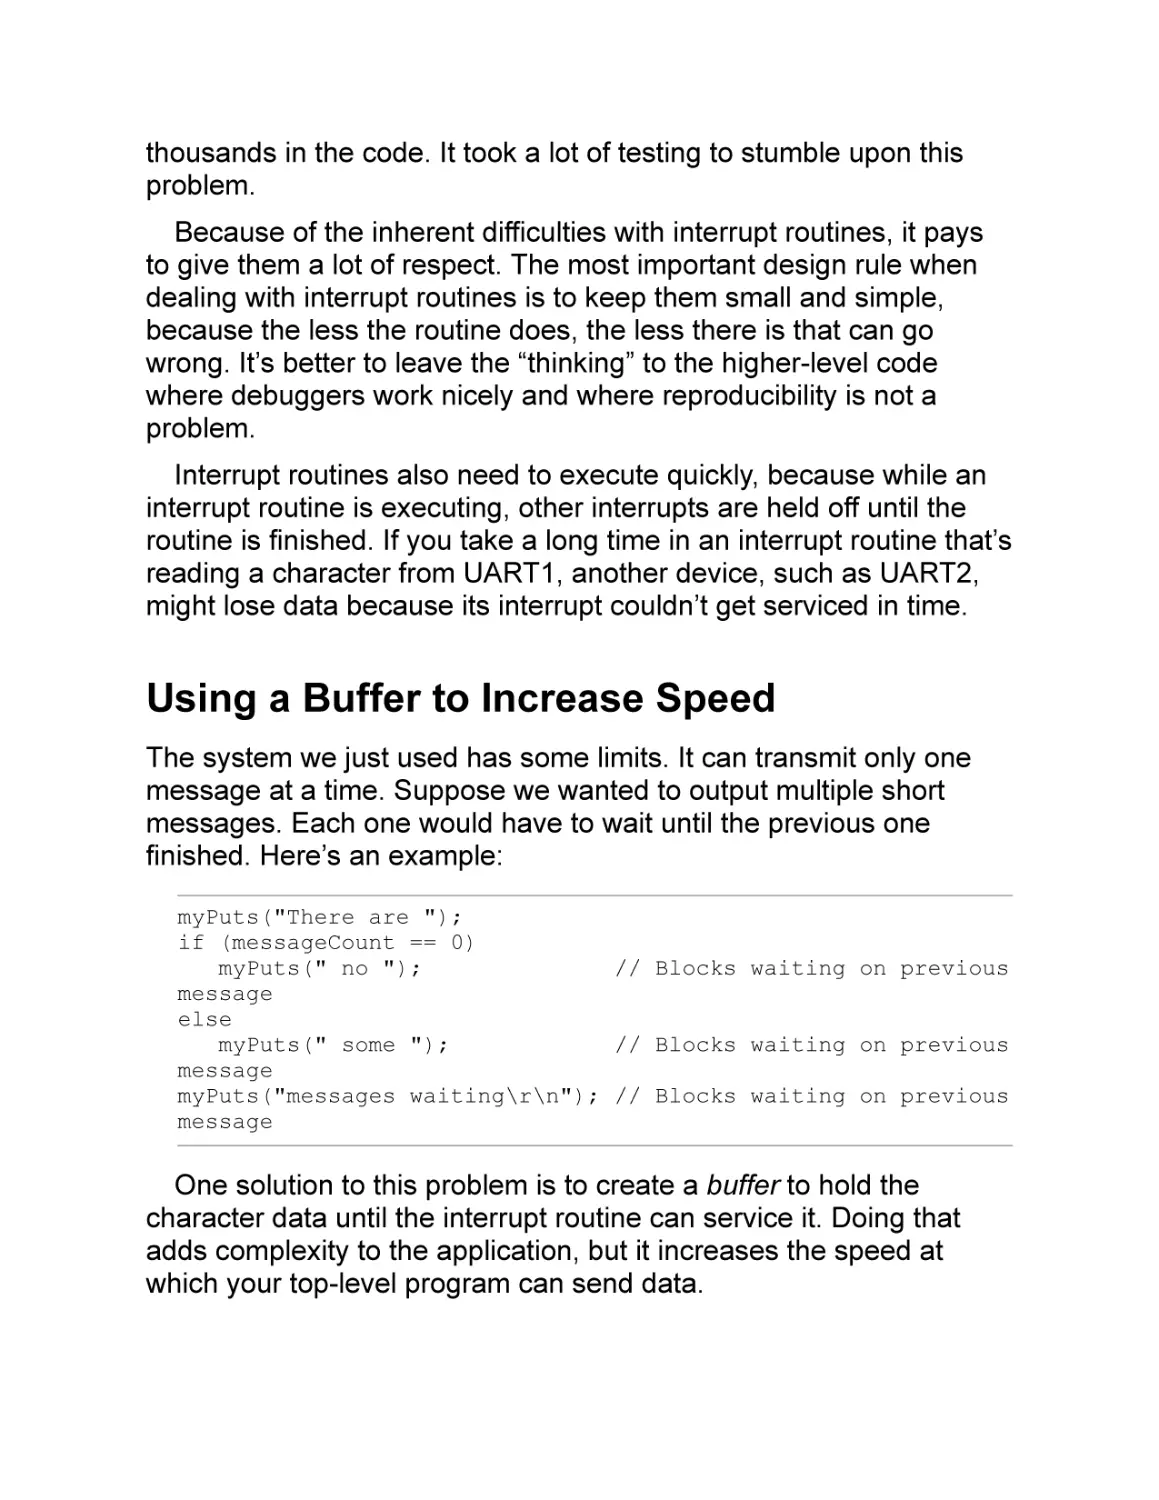 Using a Buffer to Increase Speed